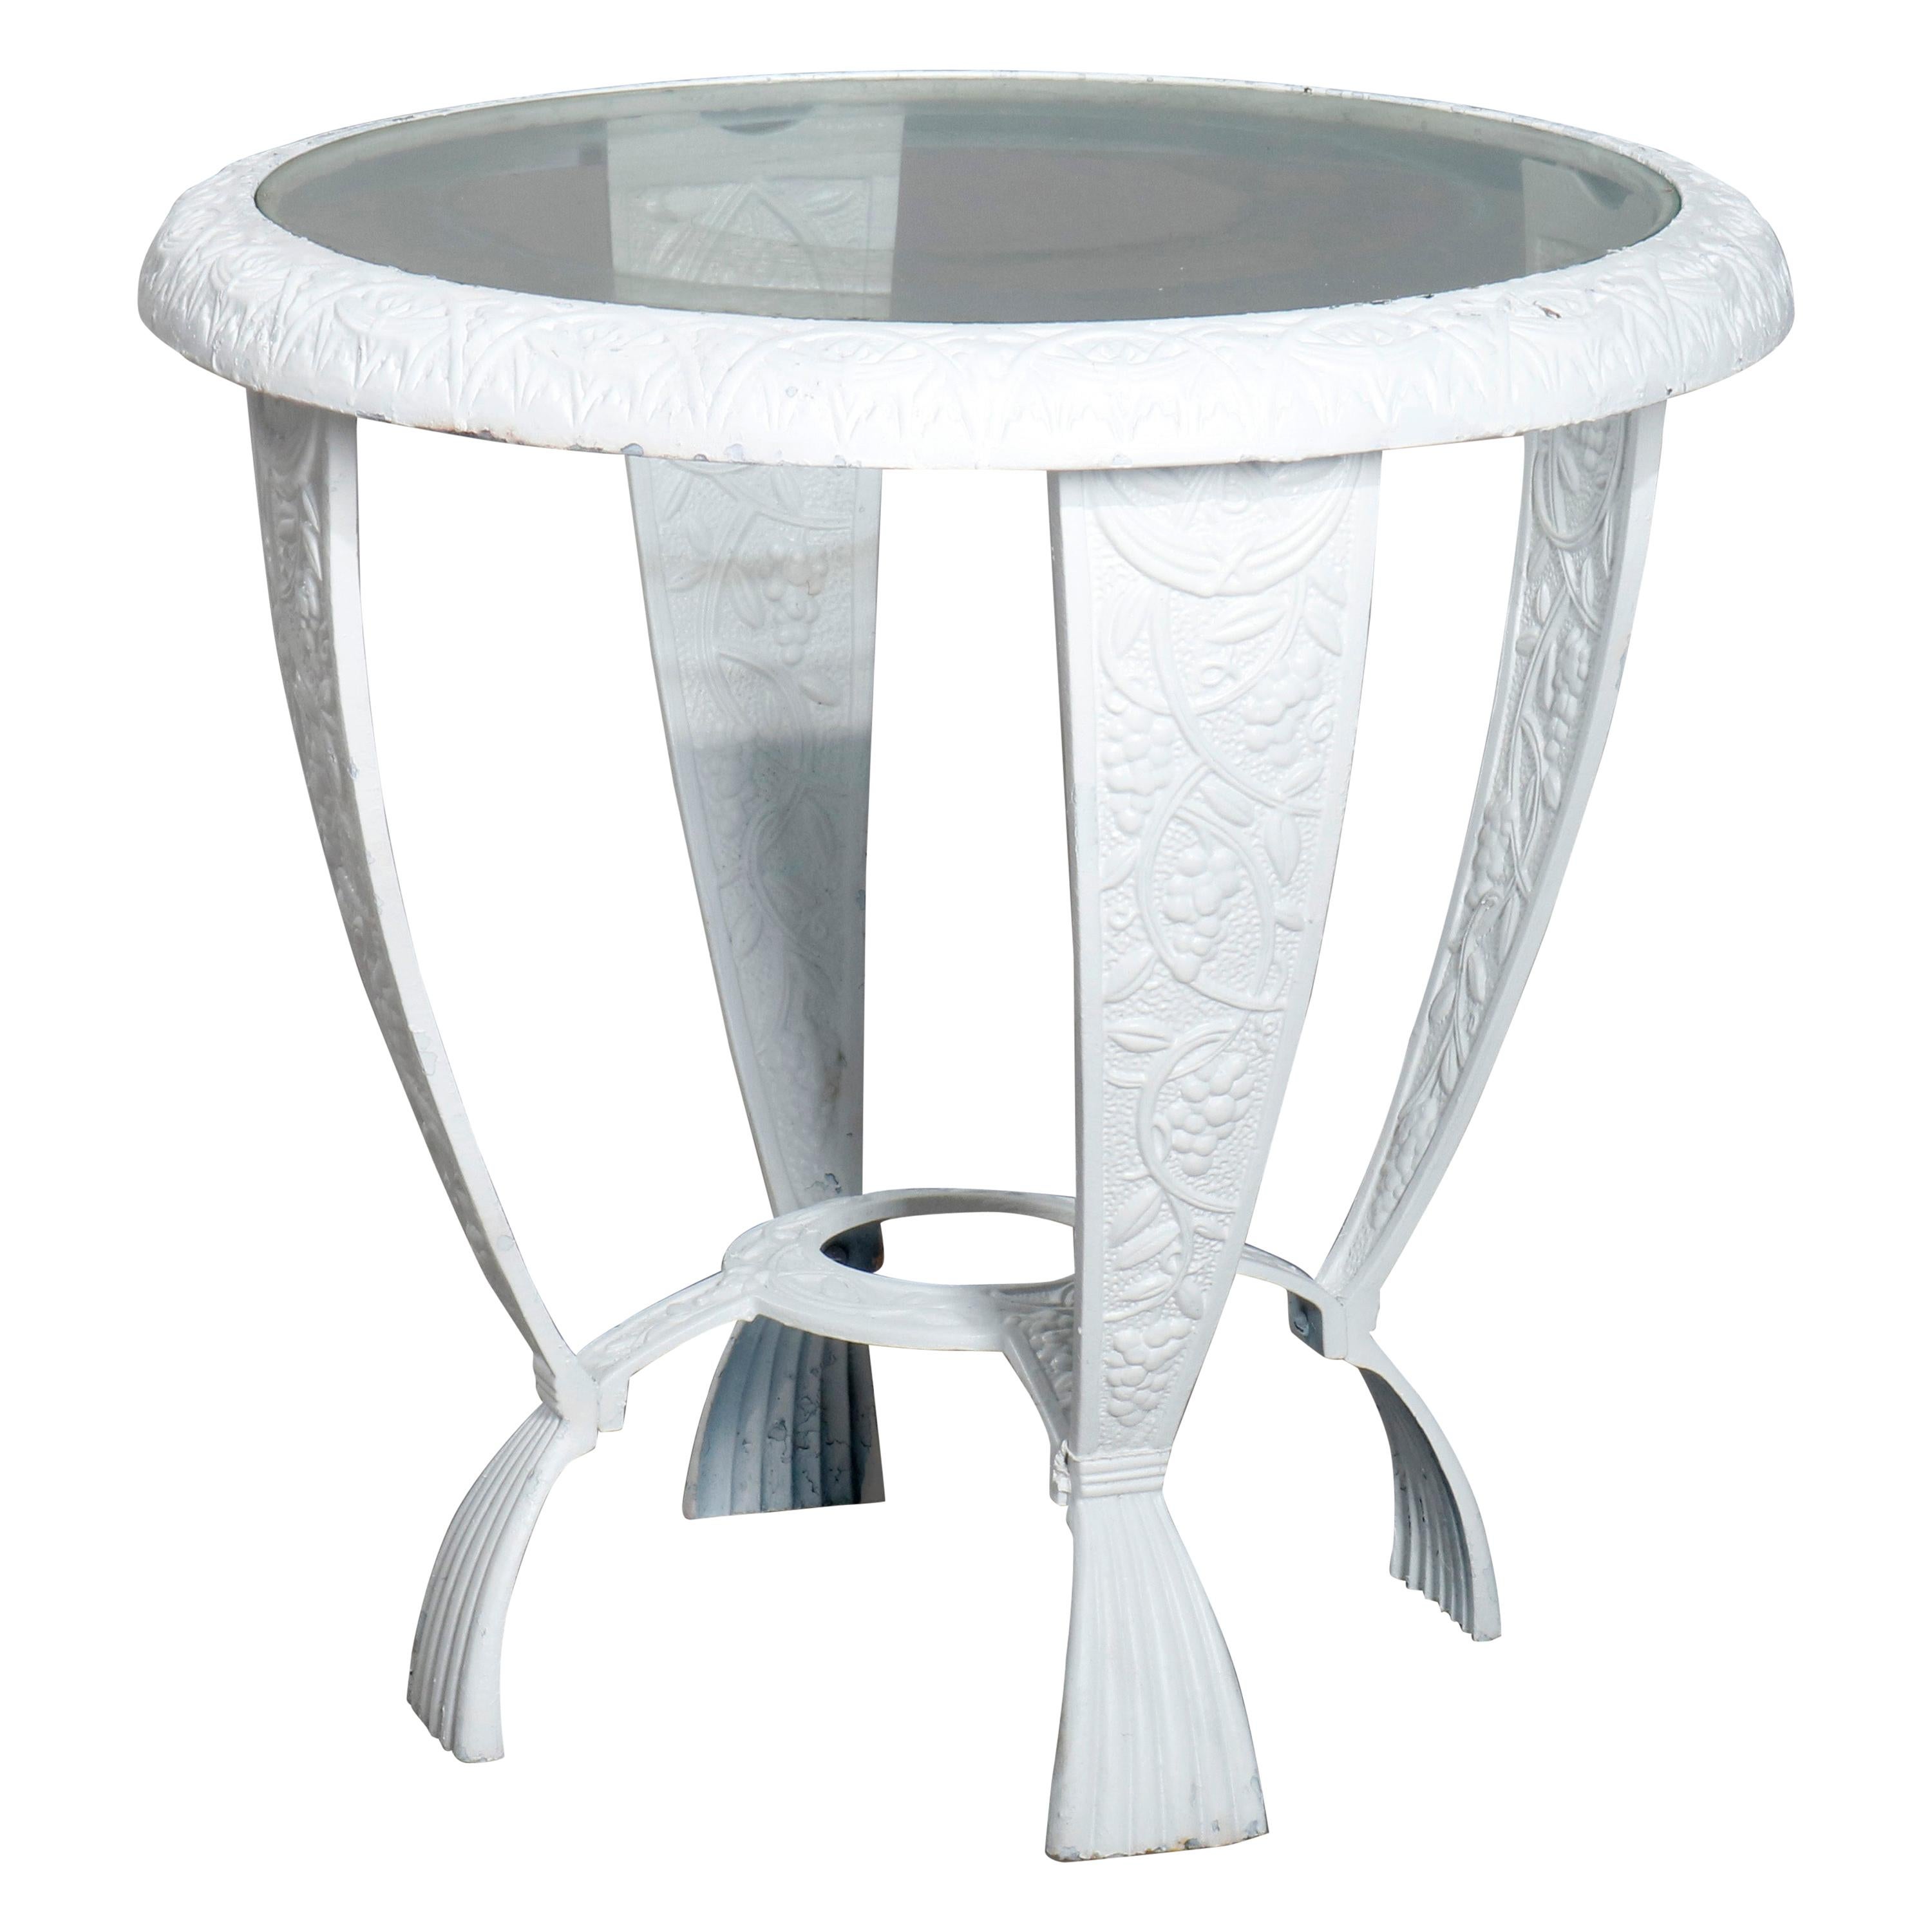 Vintage Grape and Leaf Cast Iron Glass Top Patio Side Table, circa 1940